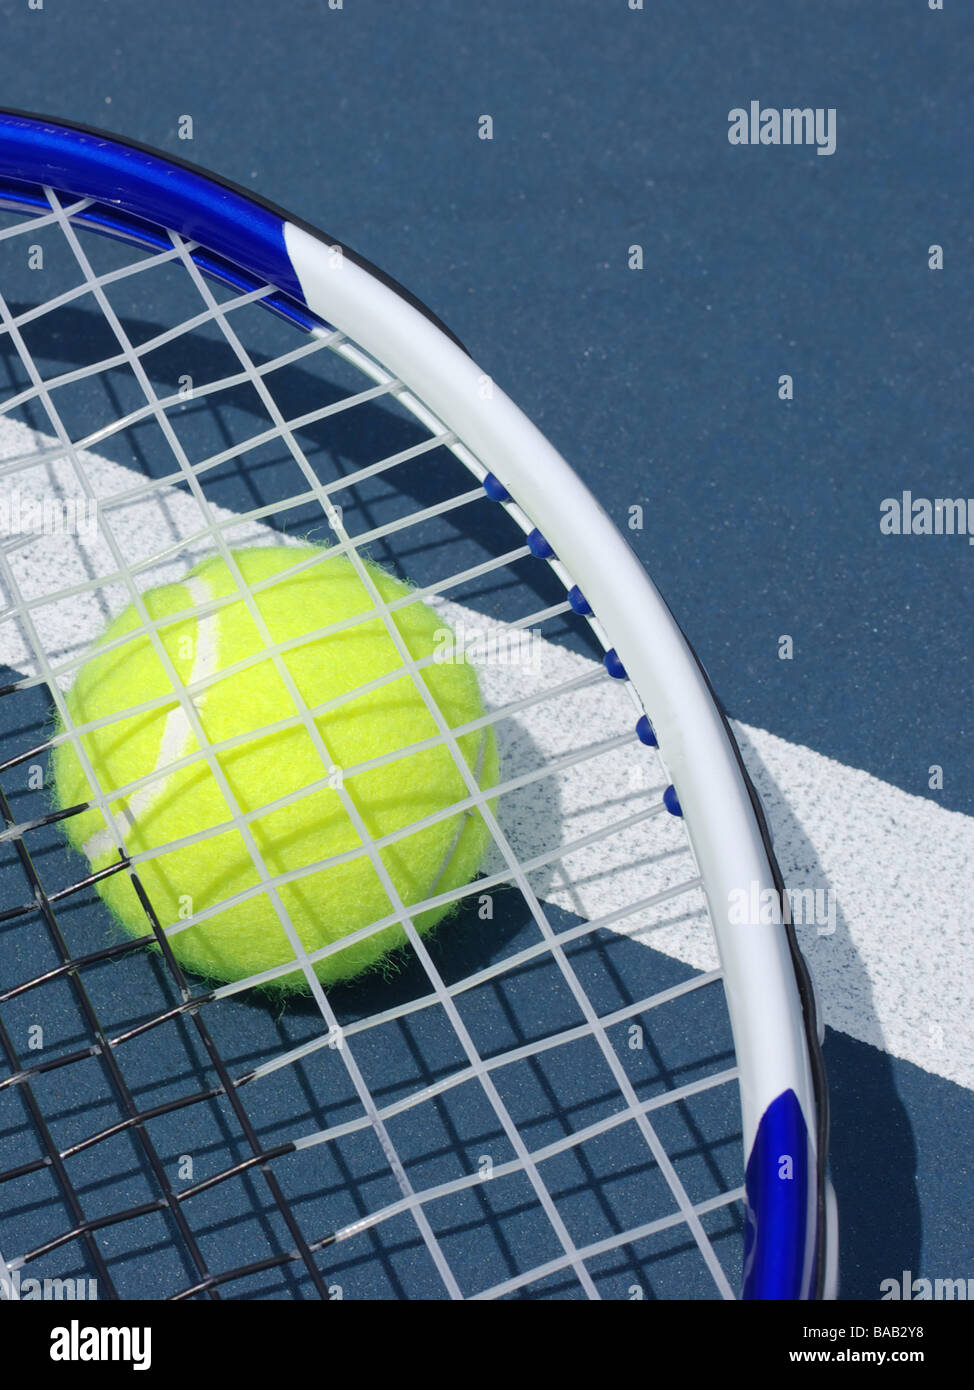 Tennis ball and racket over service line Stock Photo